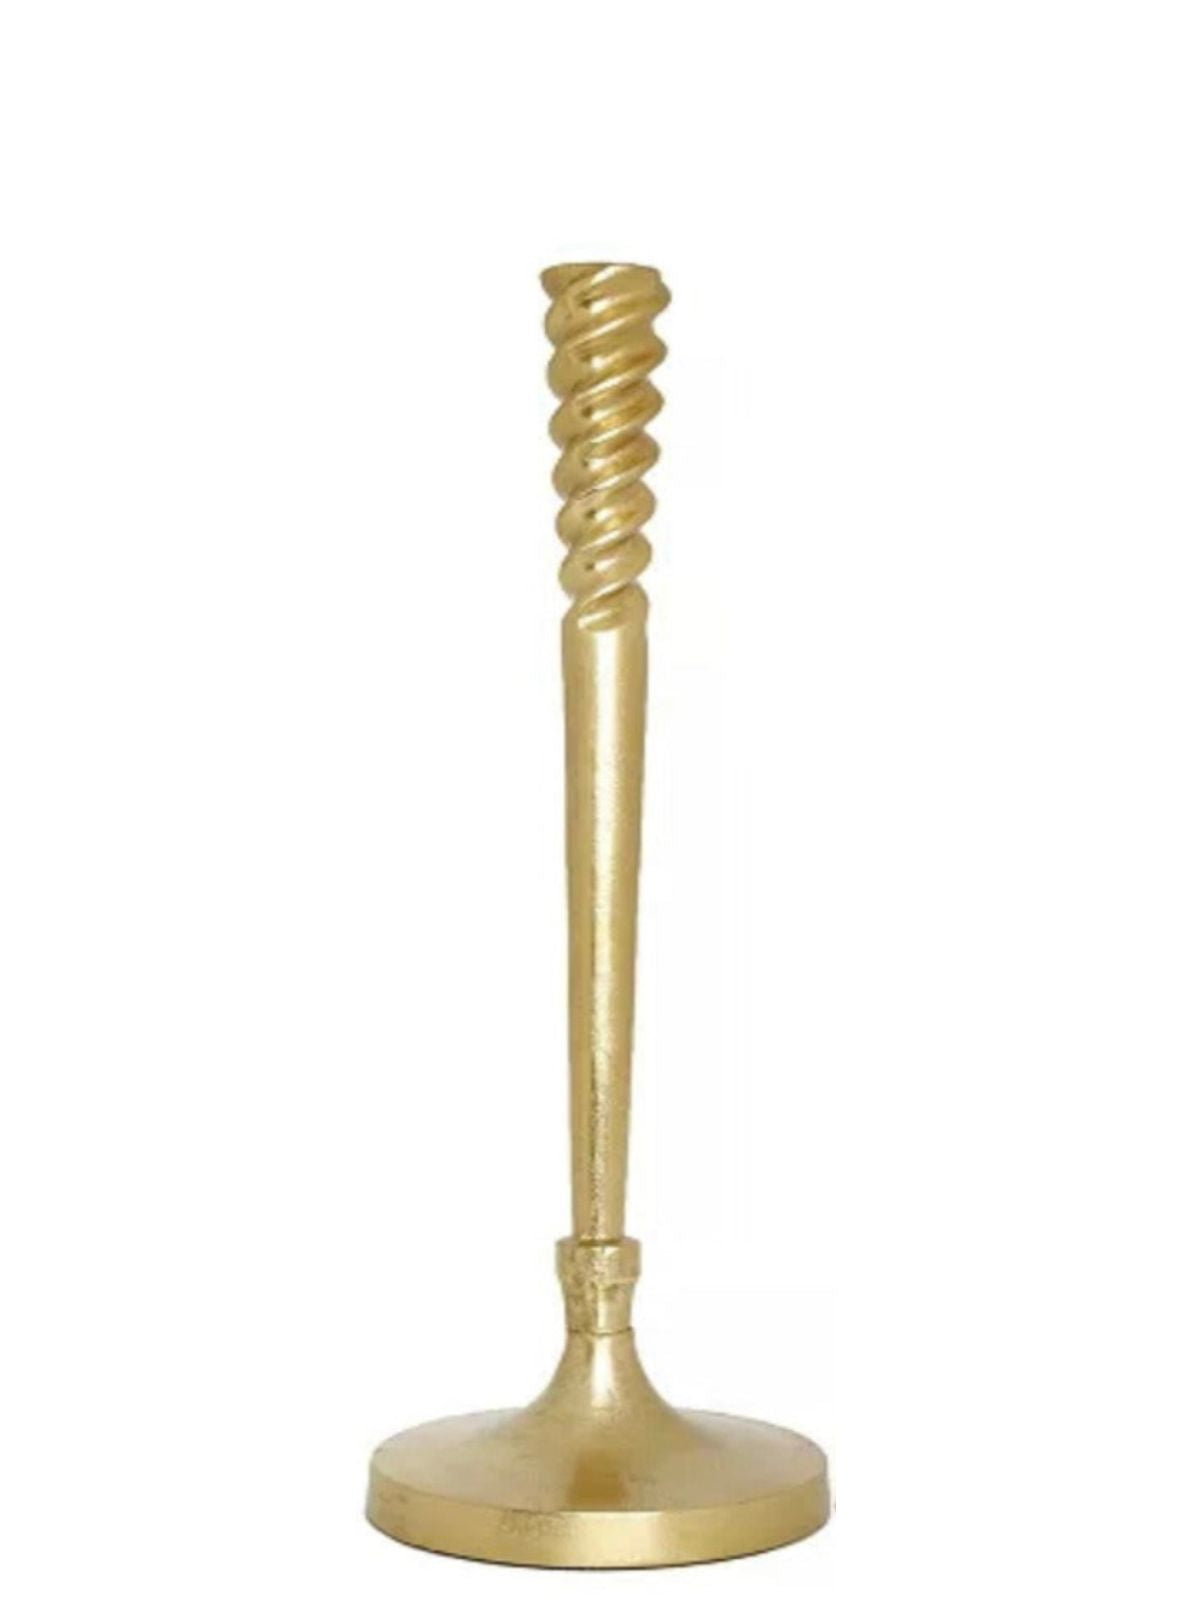 This 19H Gold Stainless Steel Candlestick Holder Has A Spiral Design On Top. Sold by KYA Home Decor.